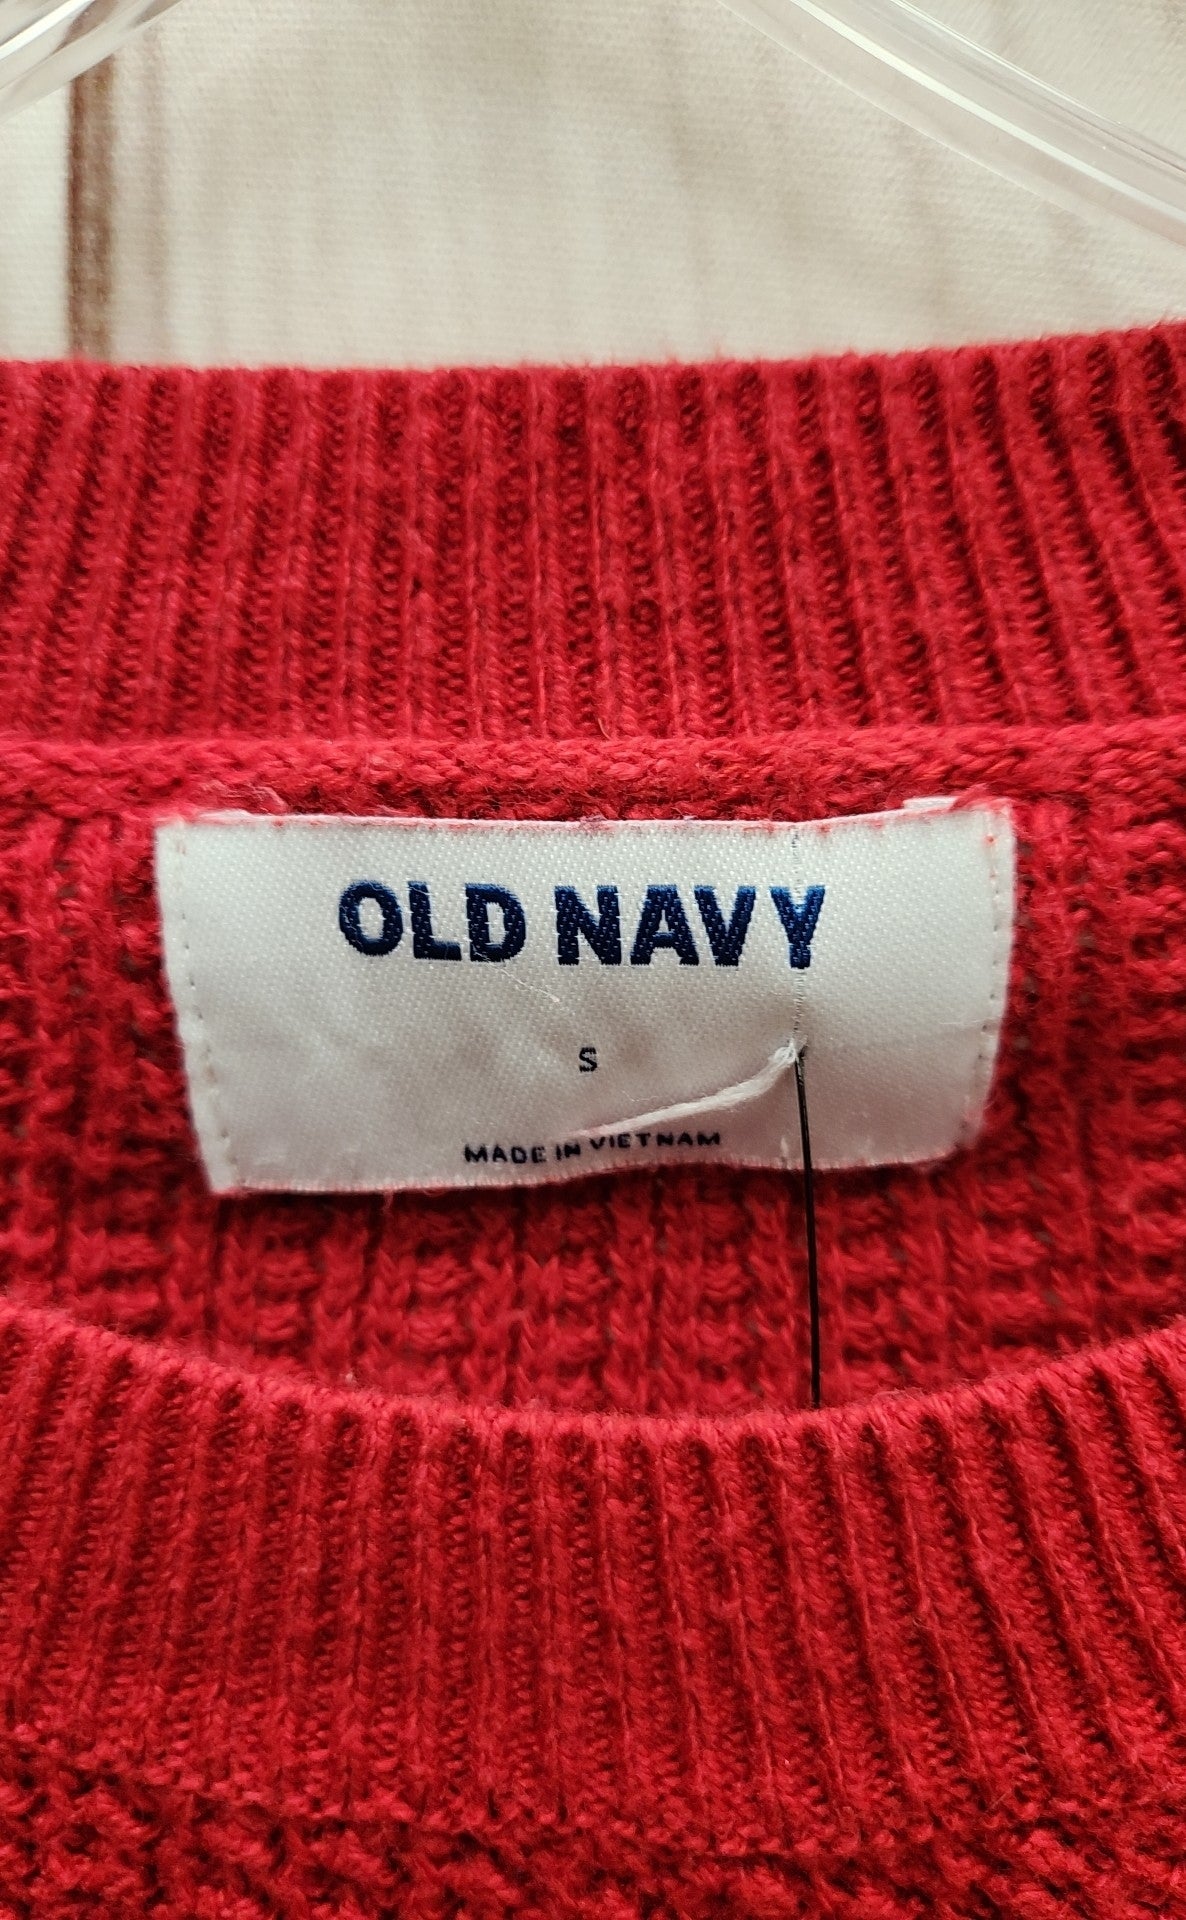 Old Navy Women's Size S Red Sweater